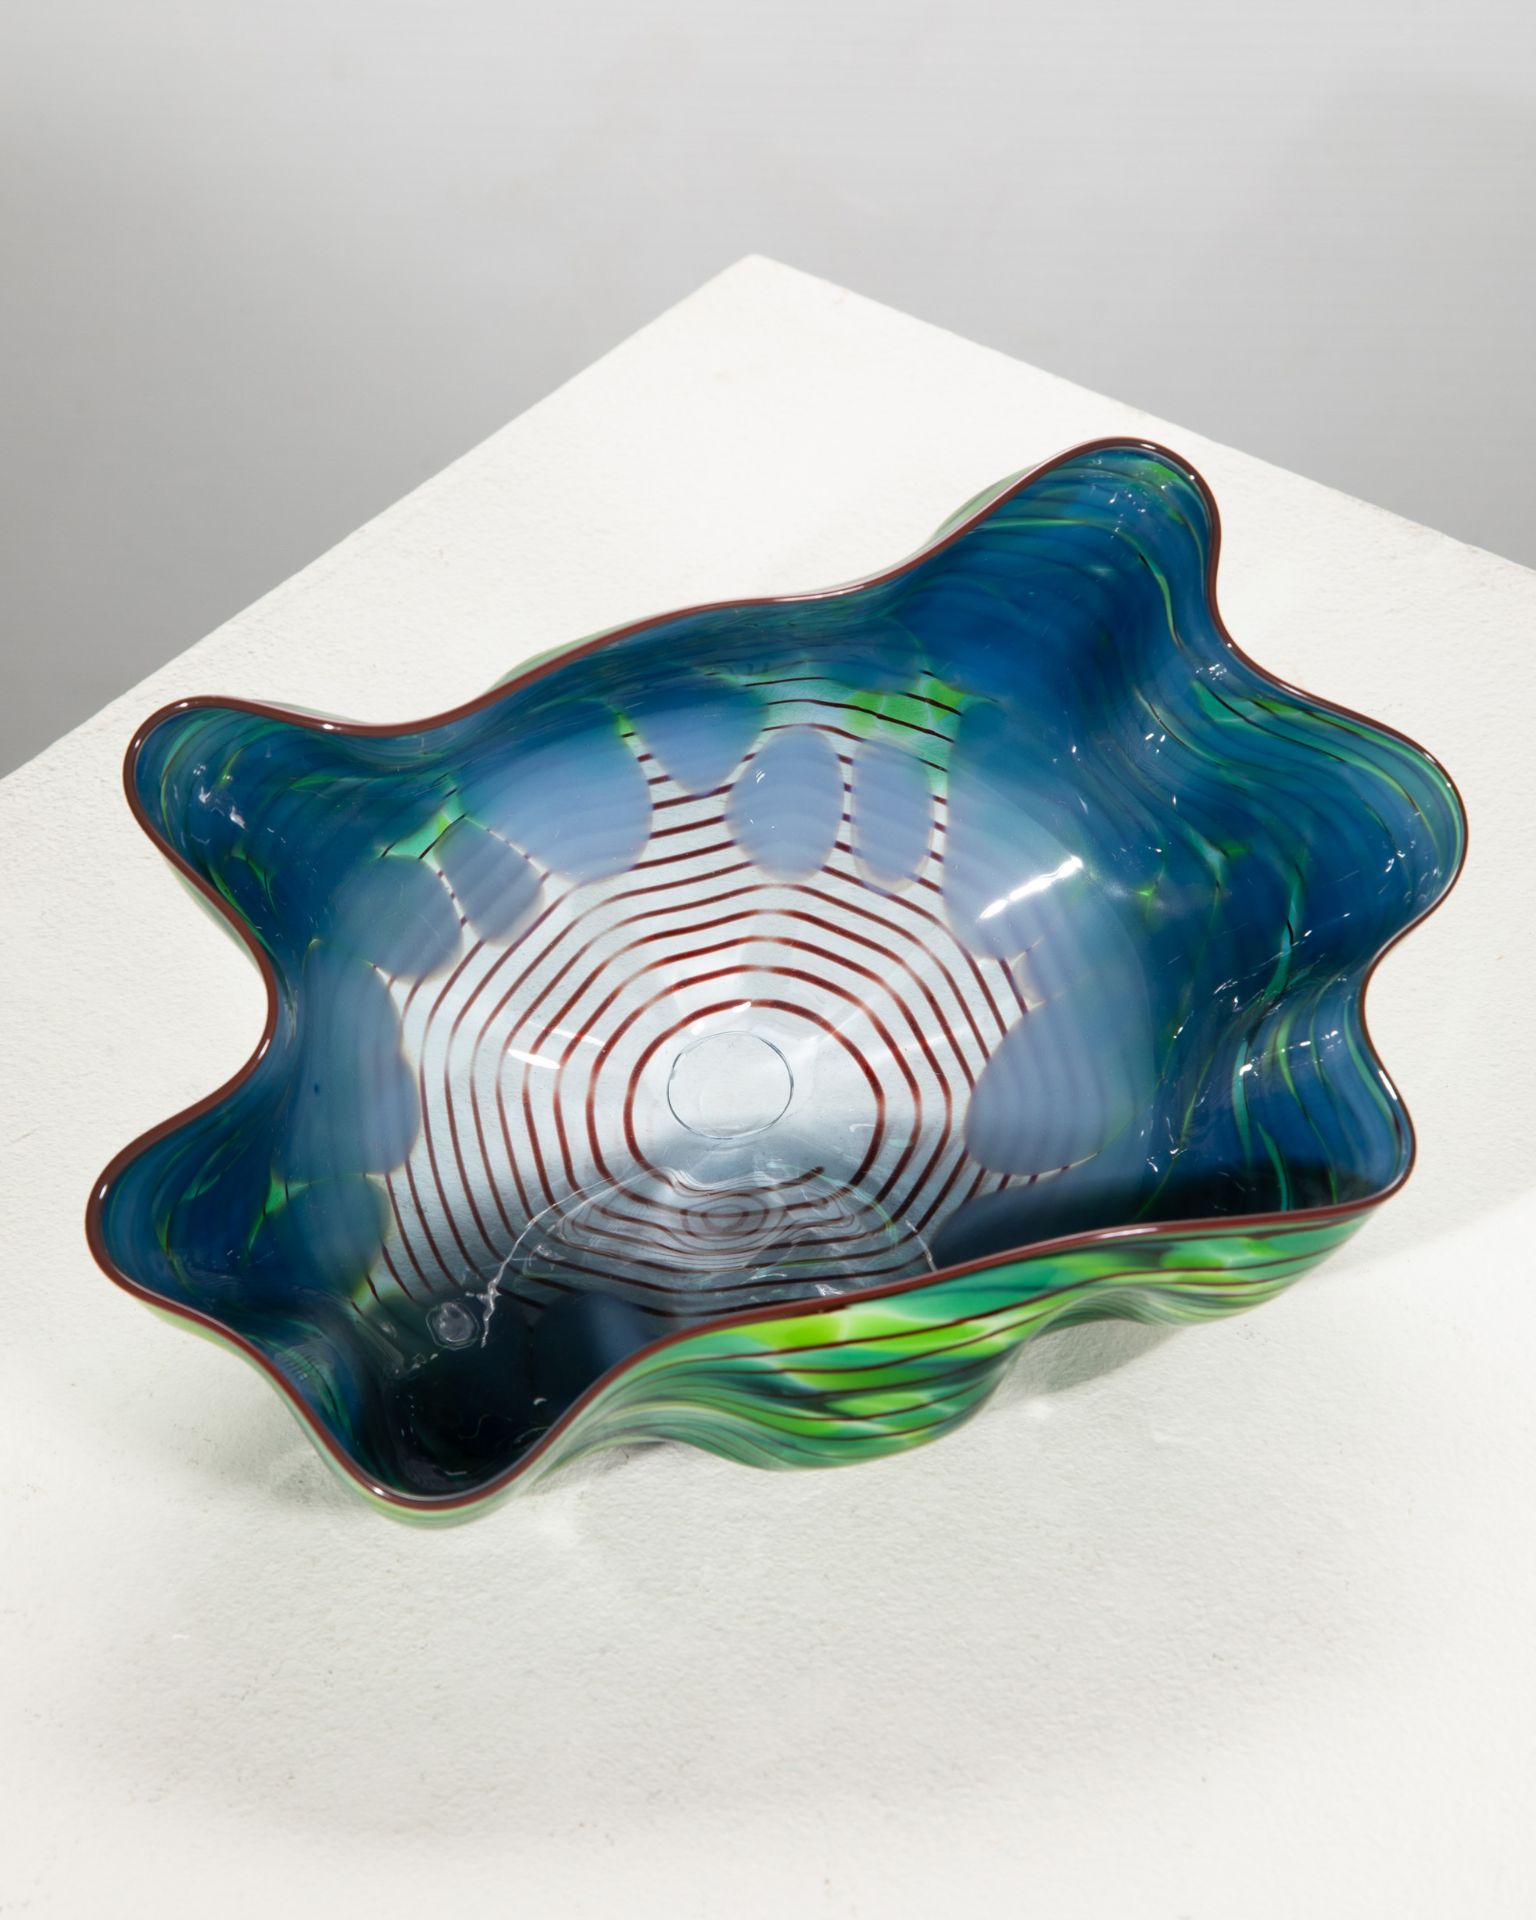 Dale Chihuly, 3 seaforms piece sculptural glasforms - Image 14 of 17